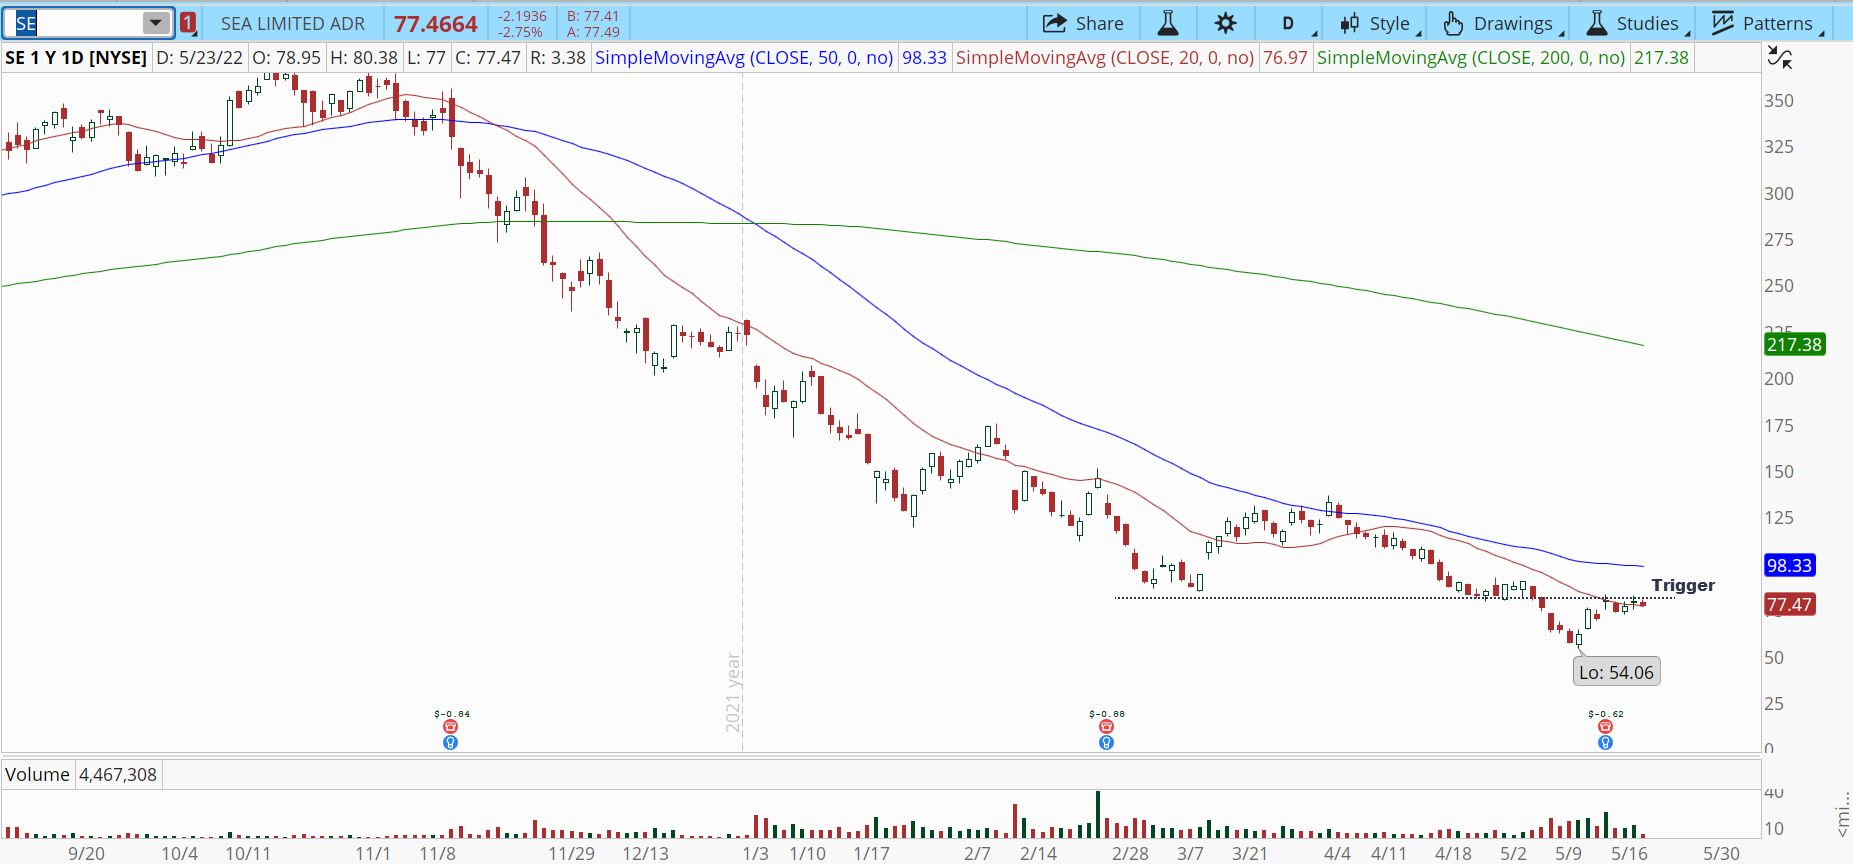 Sea Limited (SE) stock chart with potential bullish breakout. 